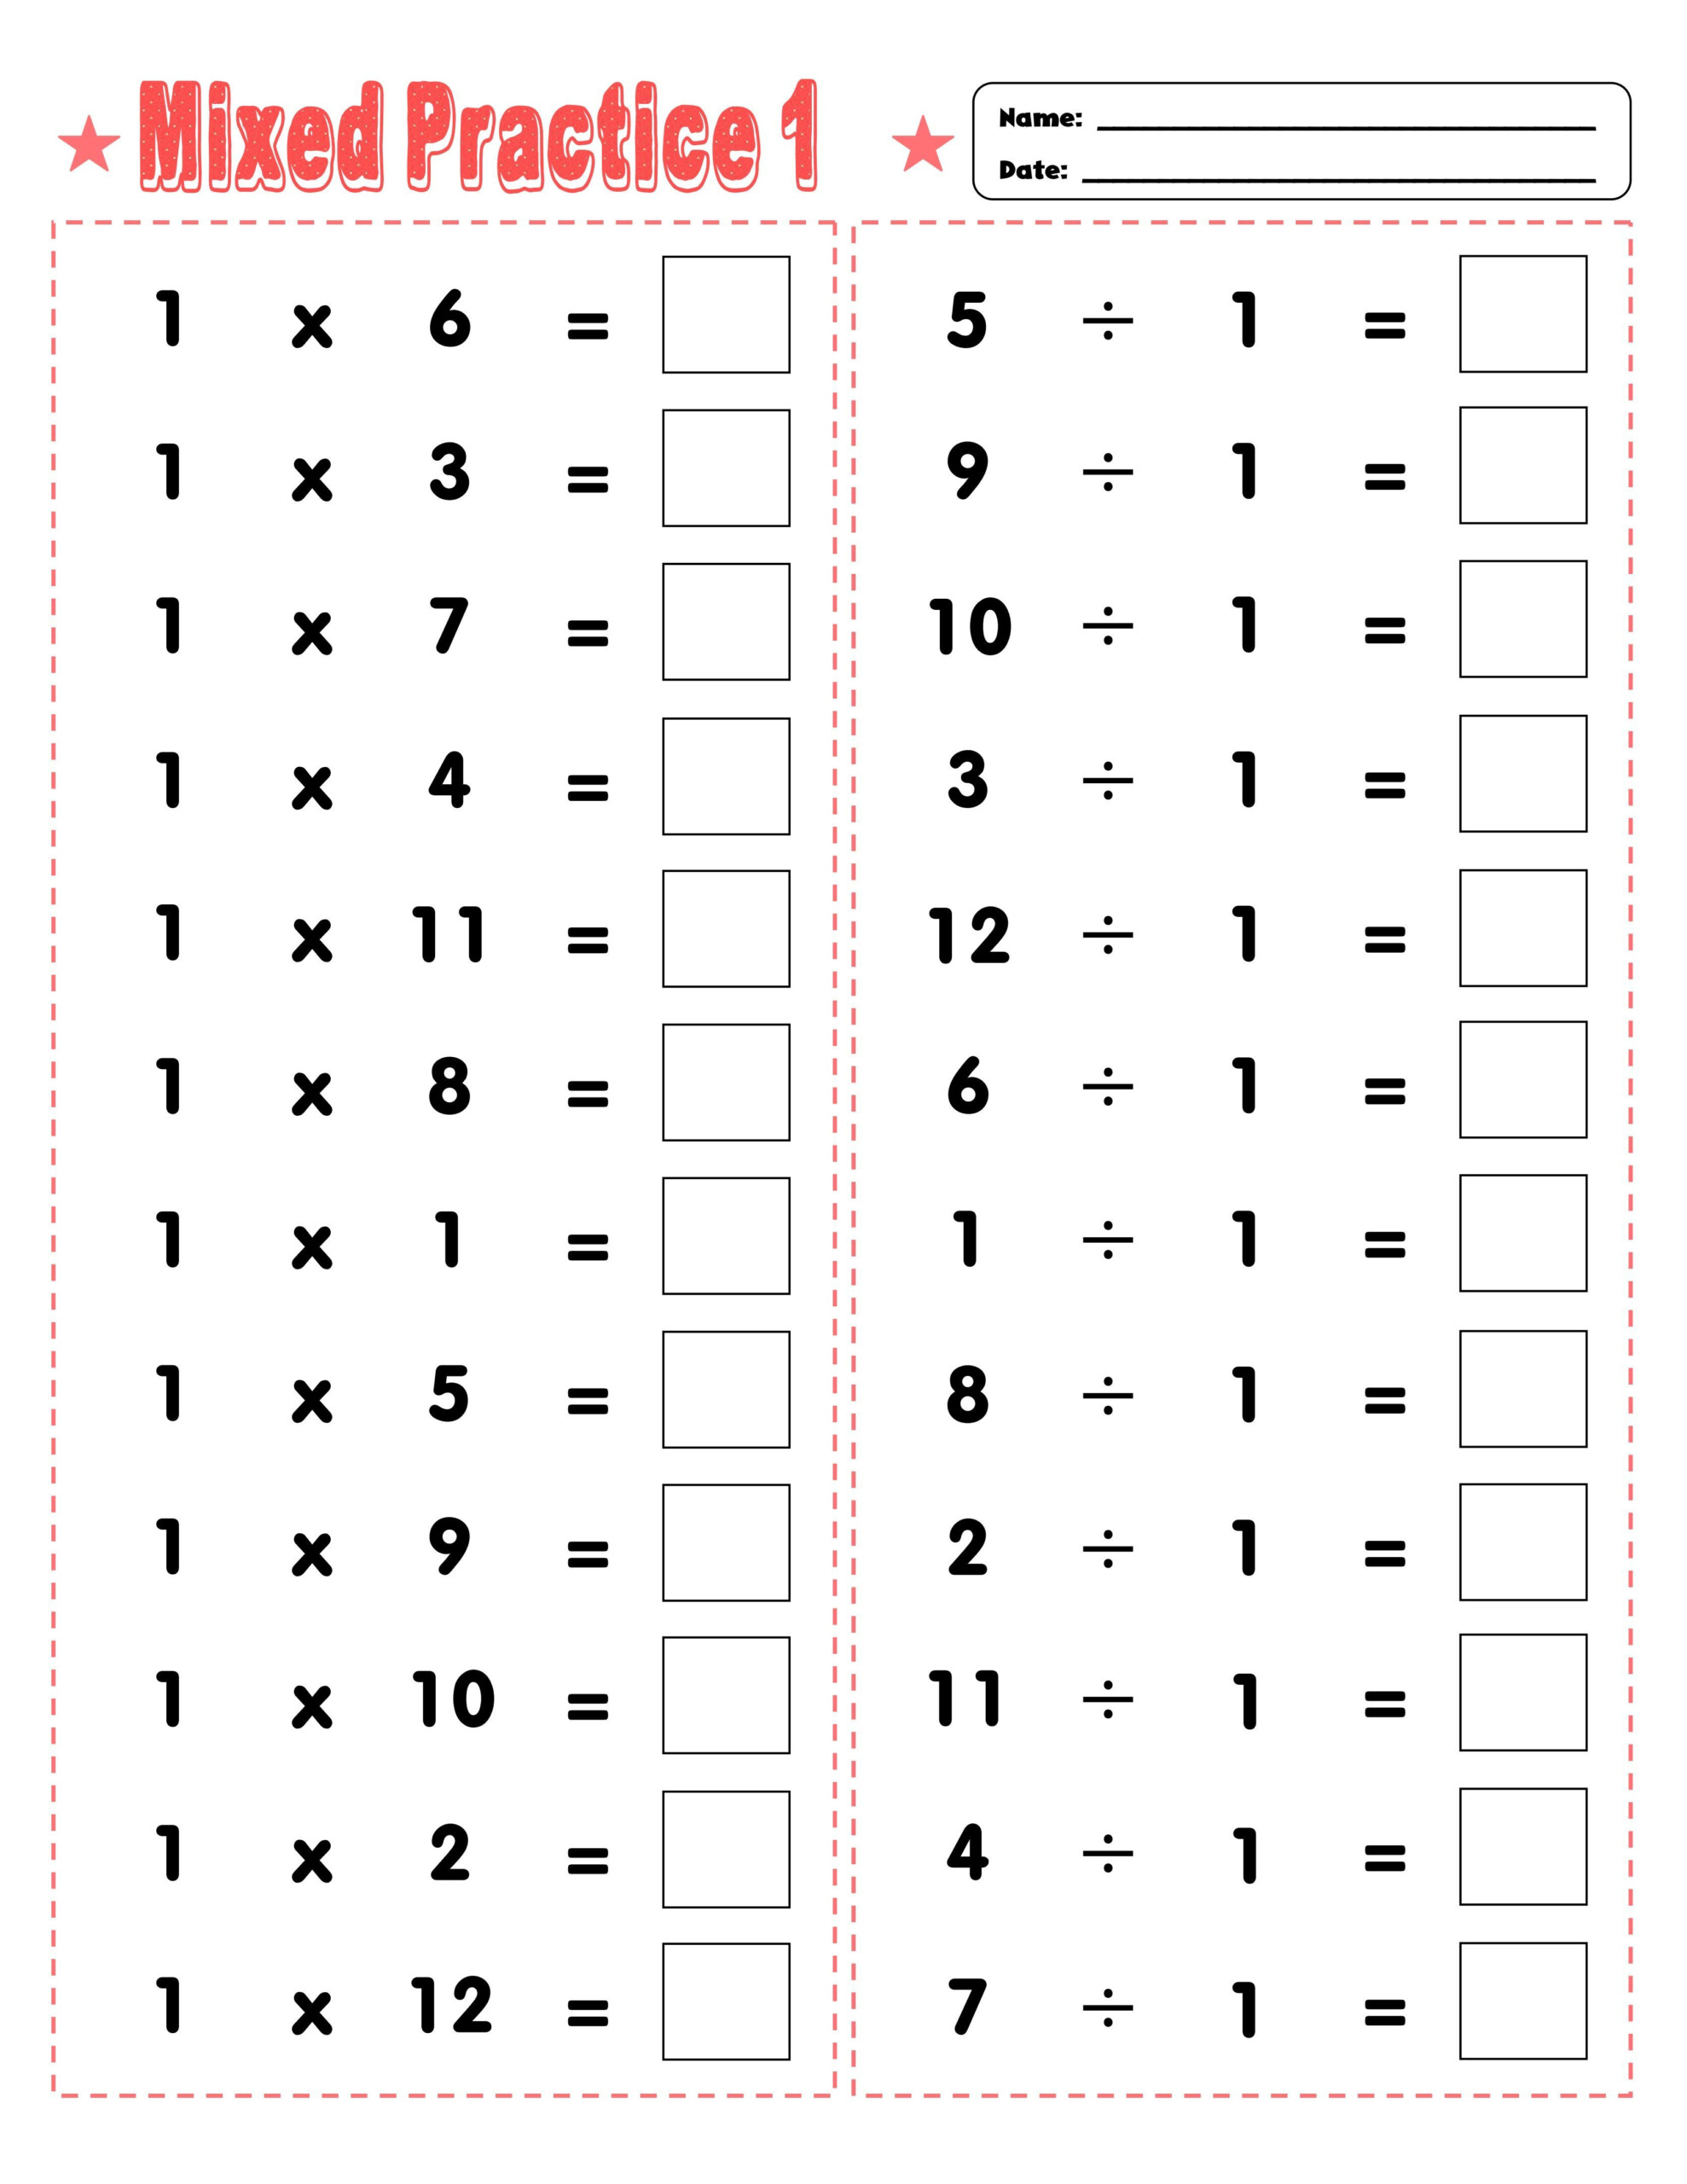 division-and-times-tables-worksheets